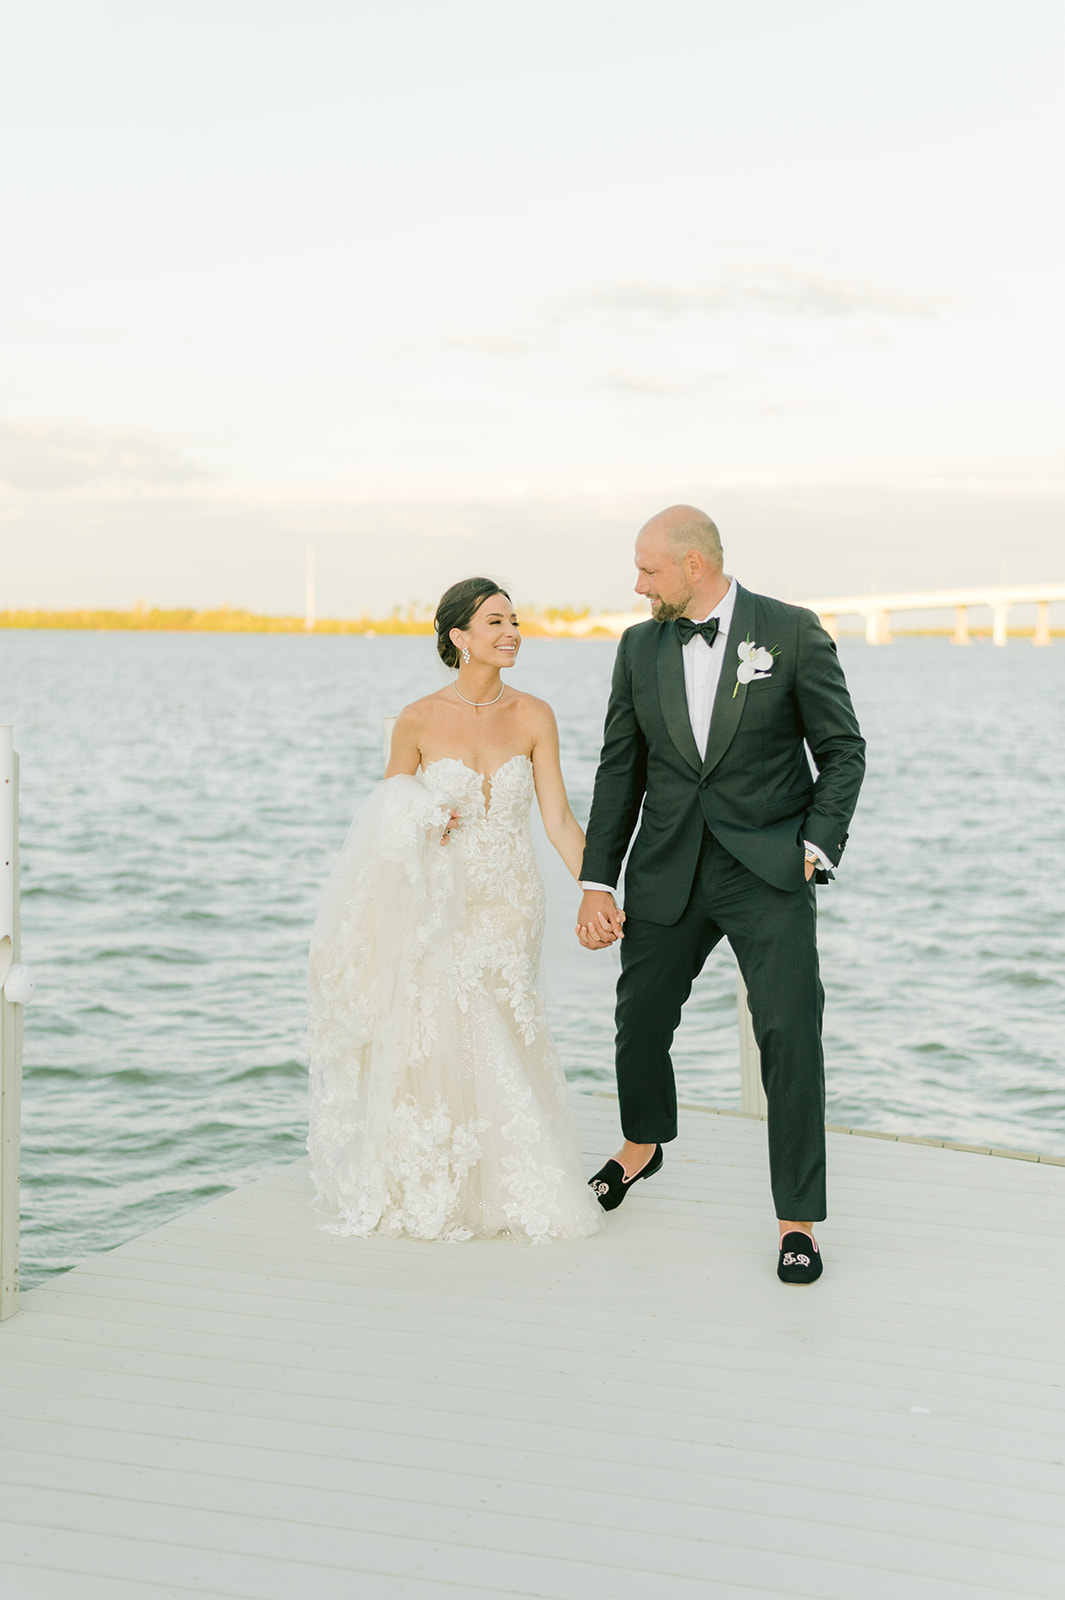 Marco Island Beach Wedding Photography - A Magical Moment in Time
